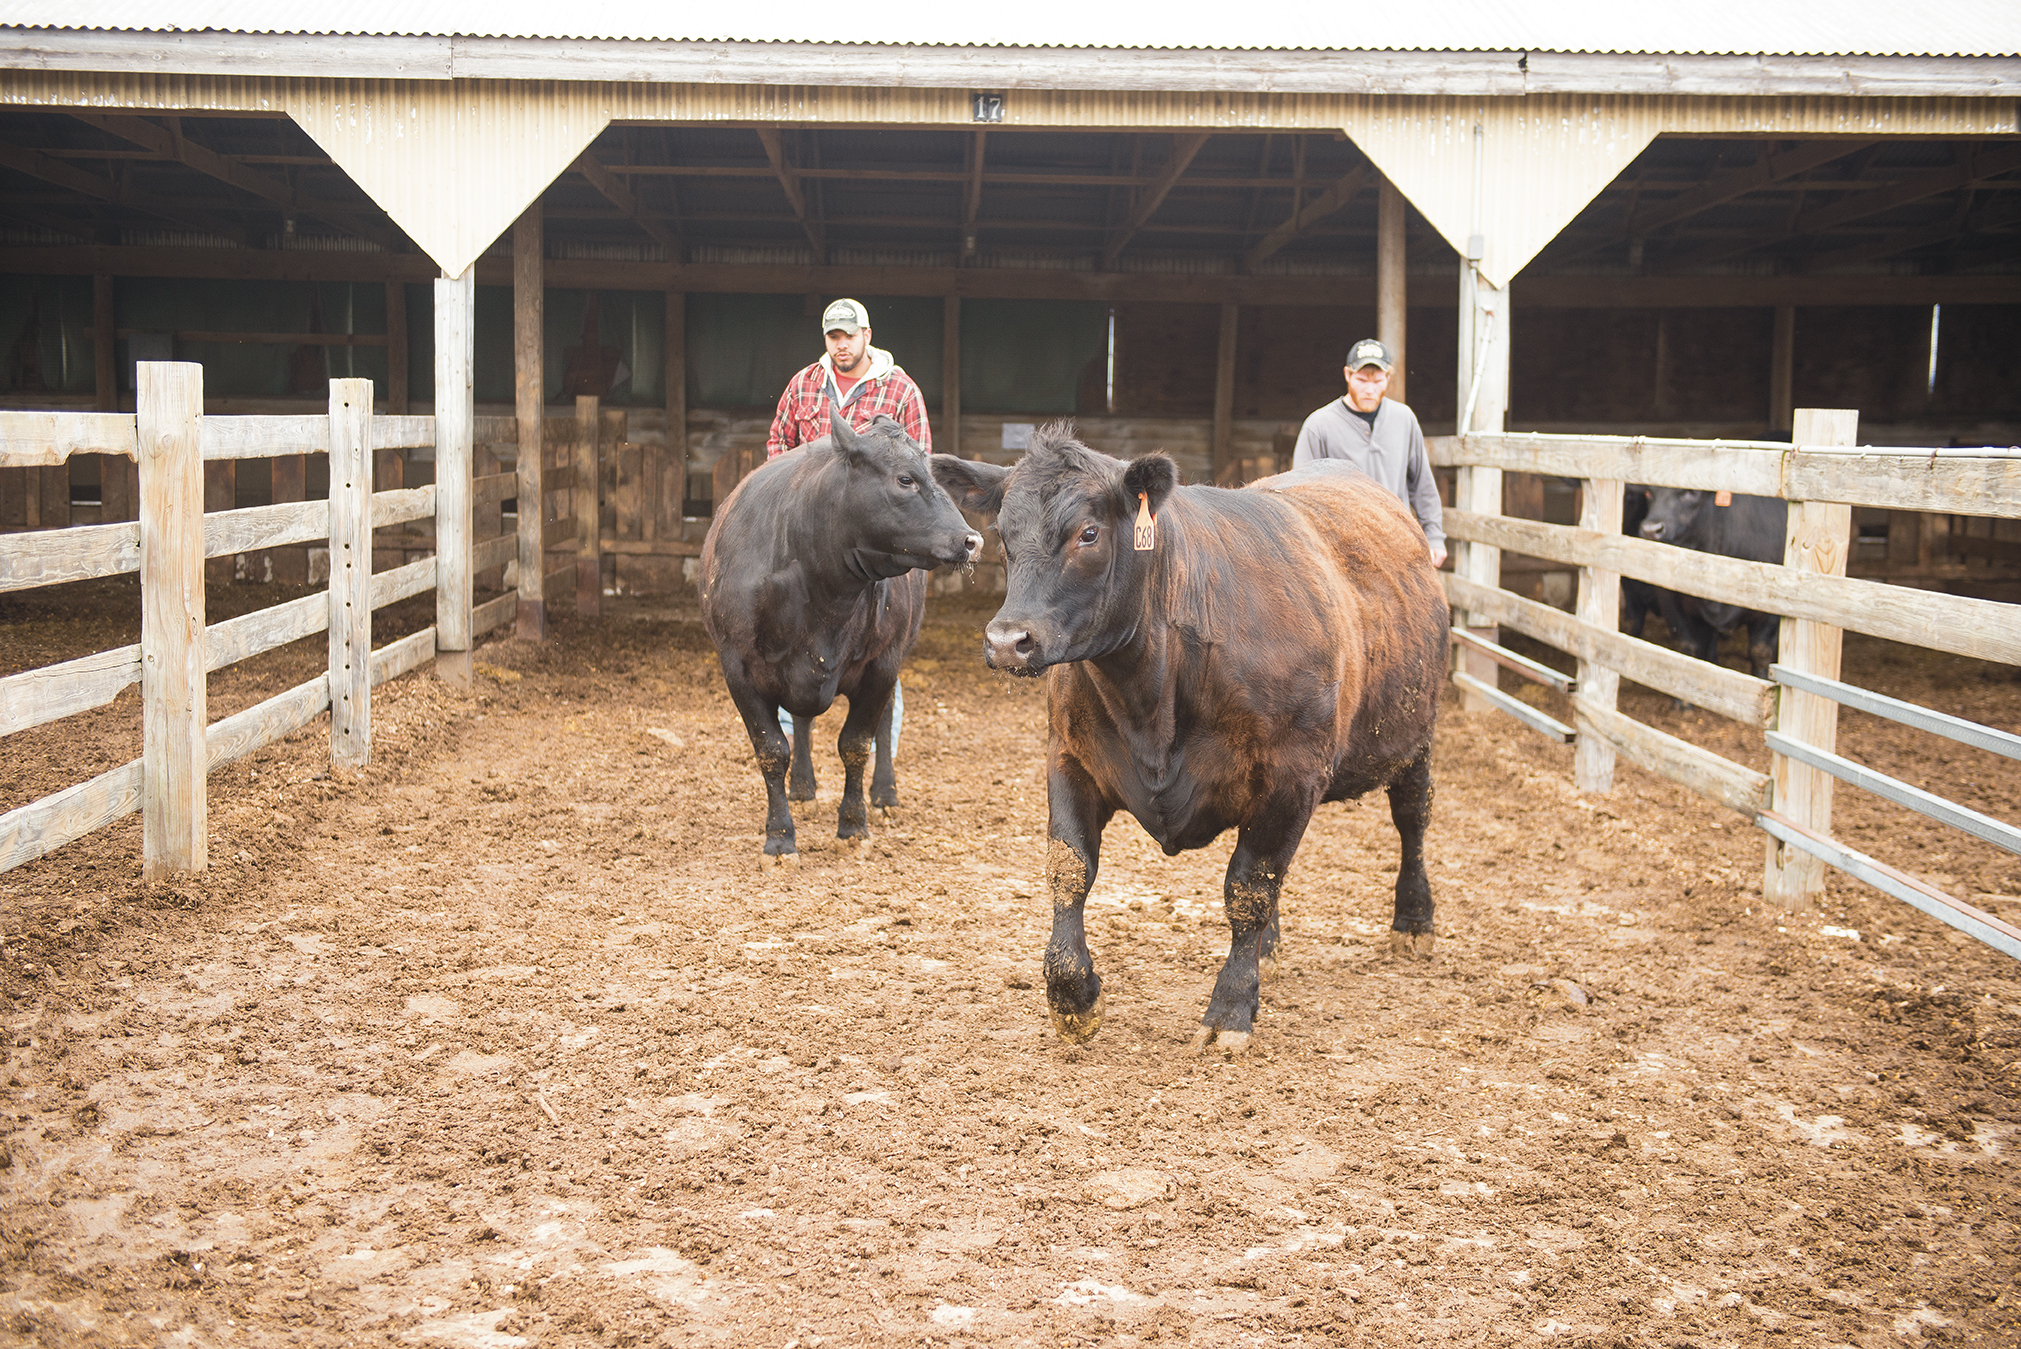 Brett Crite ’16, then an undergraduate student and farm employee, and Parmenter usher cattle into a chute through which they were directed to a scale.